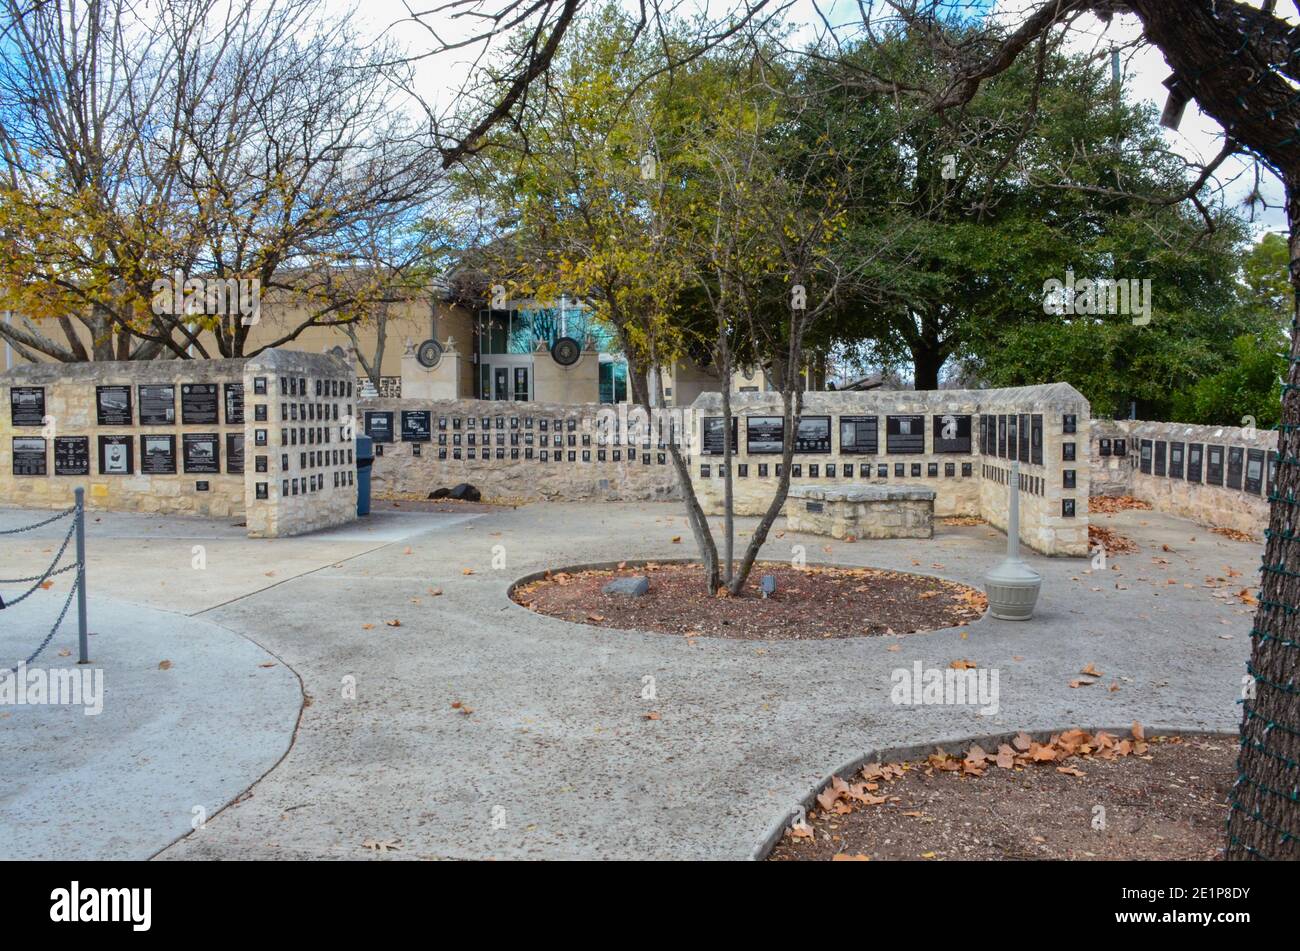 The National Museum of the Pacific War, Fredericksburg, Texas, USA. December 2020. Stock Photo